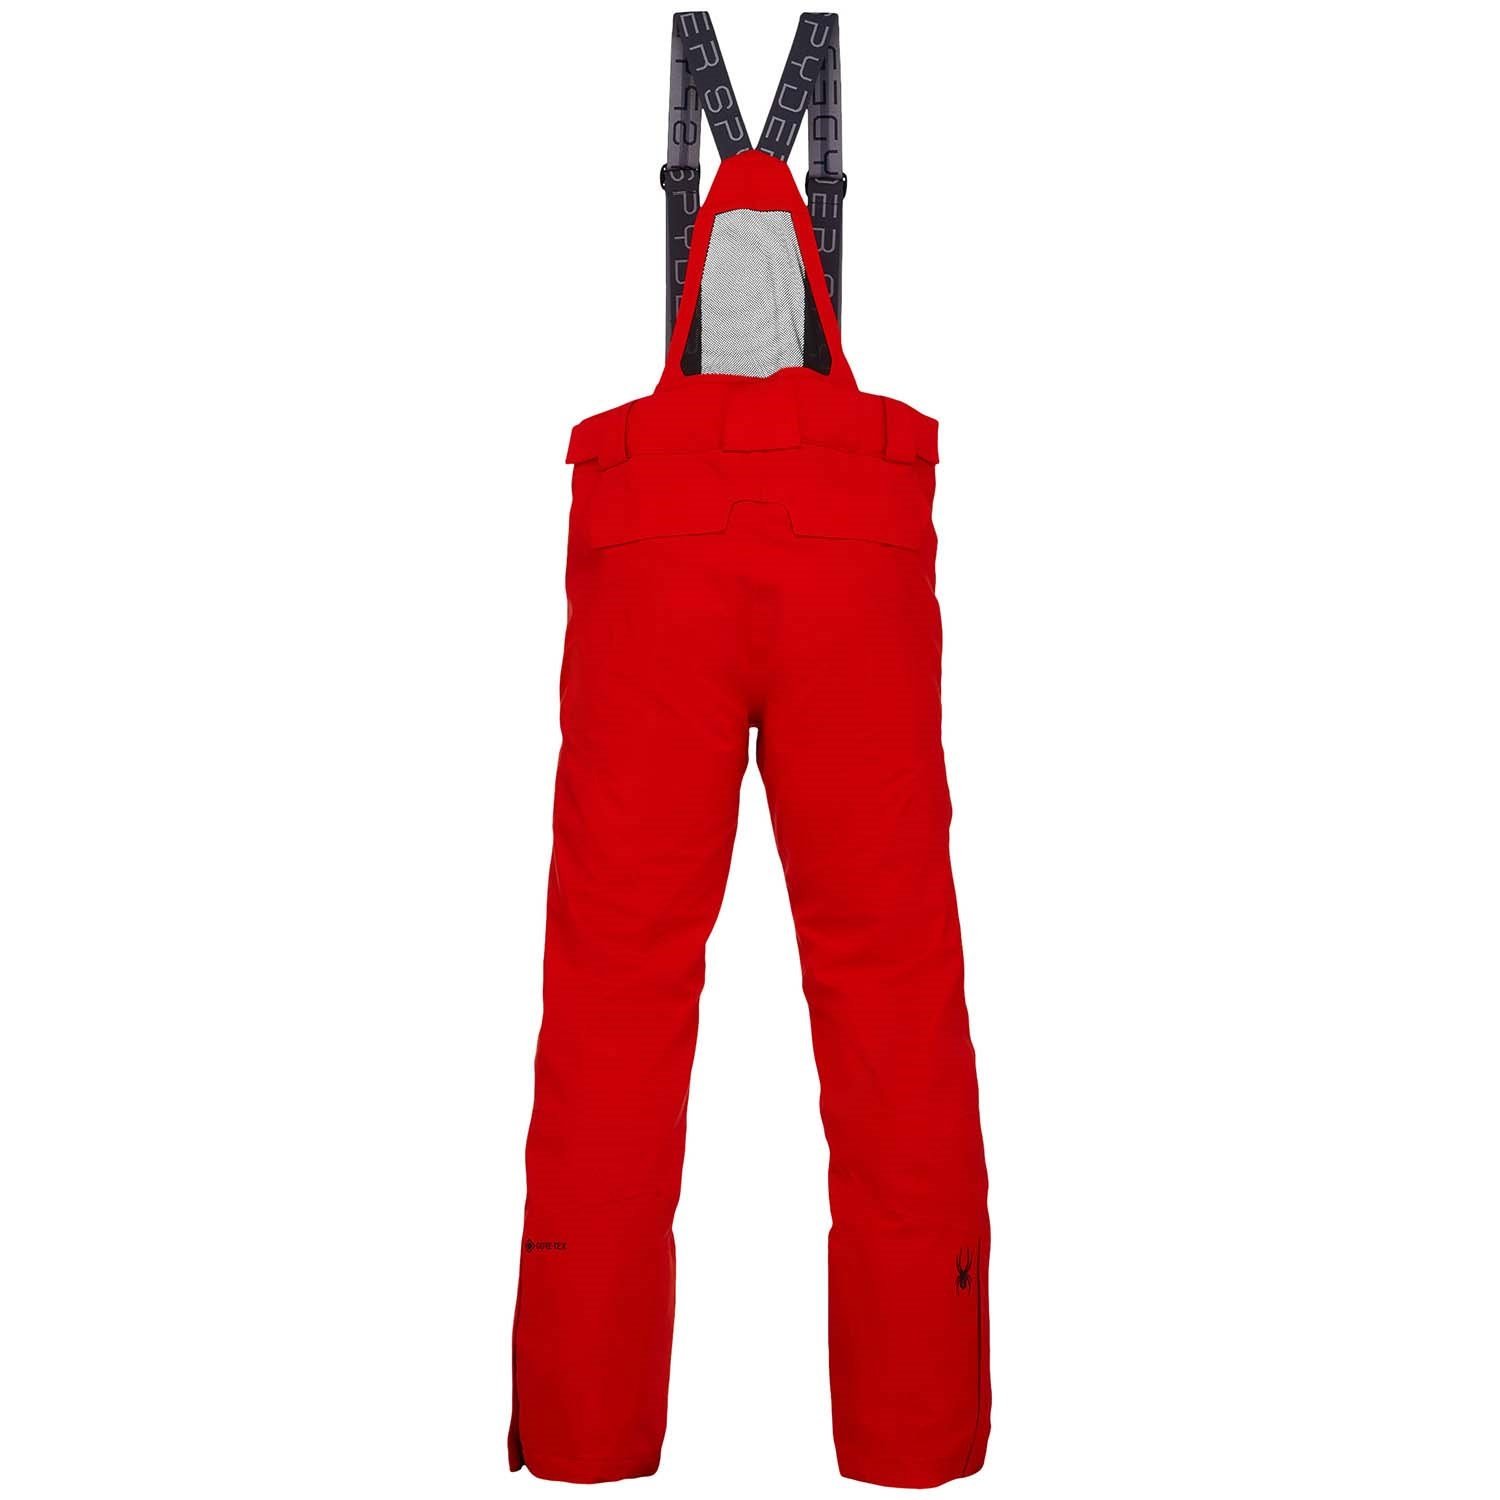 Spyder, Pants & Jumpsuits, Spyder Womens Full Length Leggings With Pockets